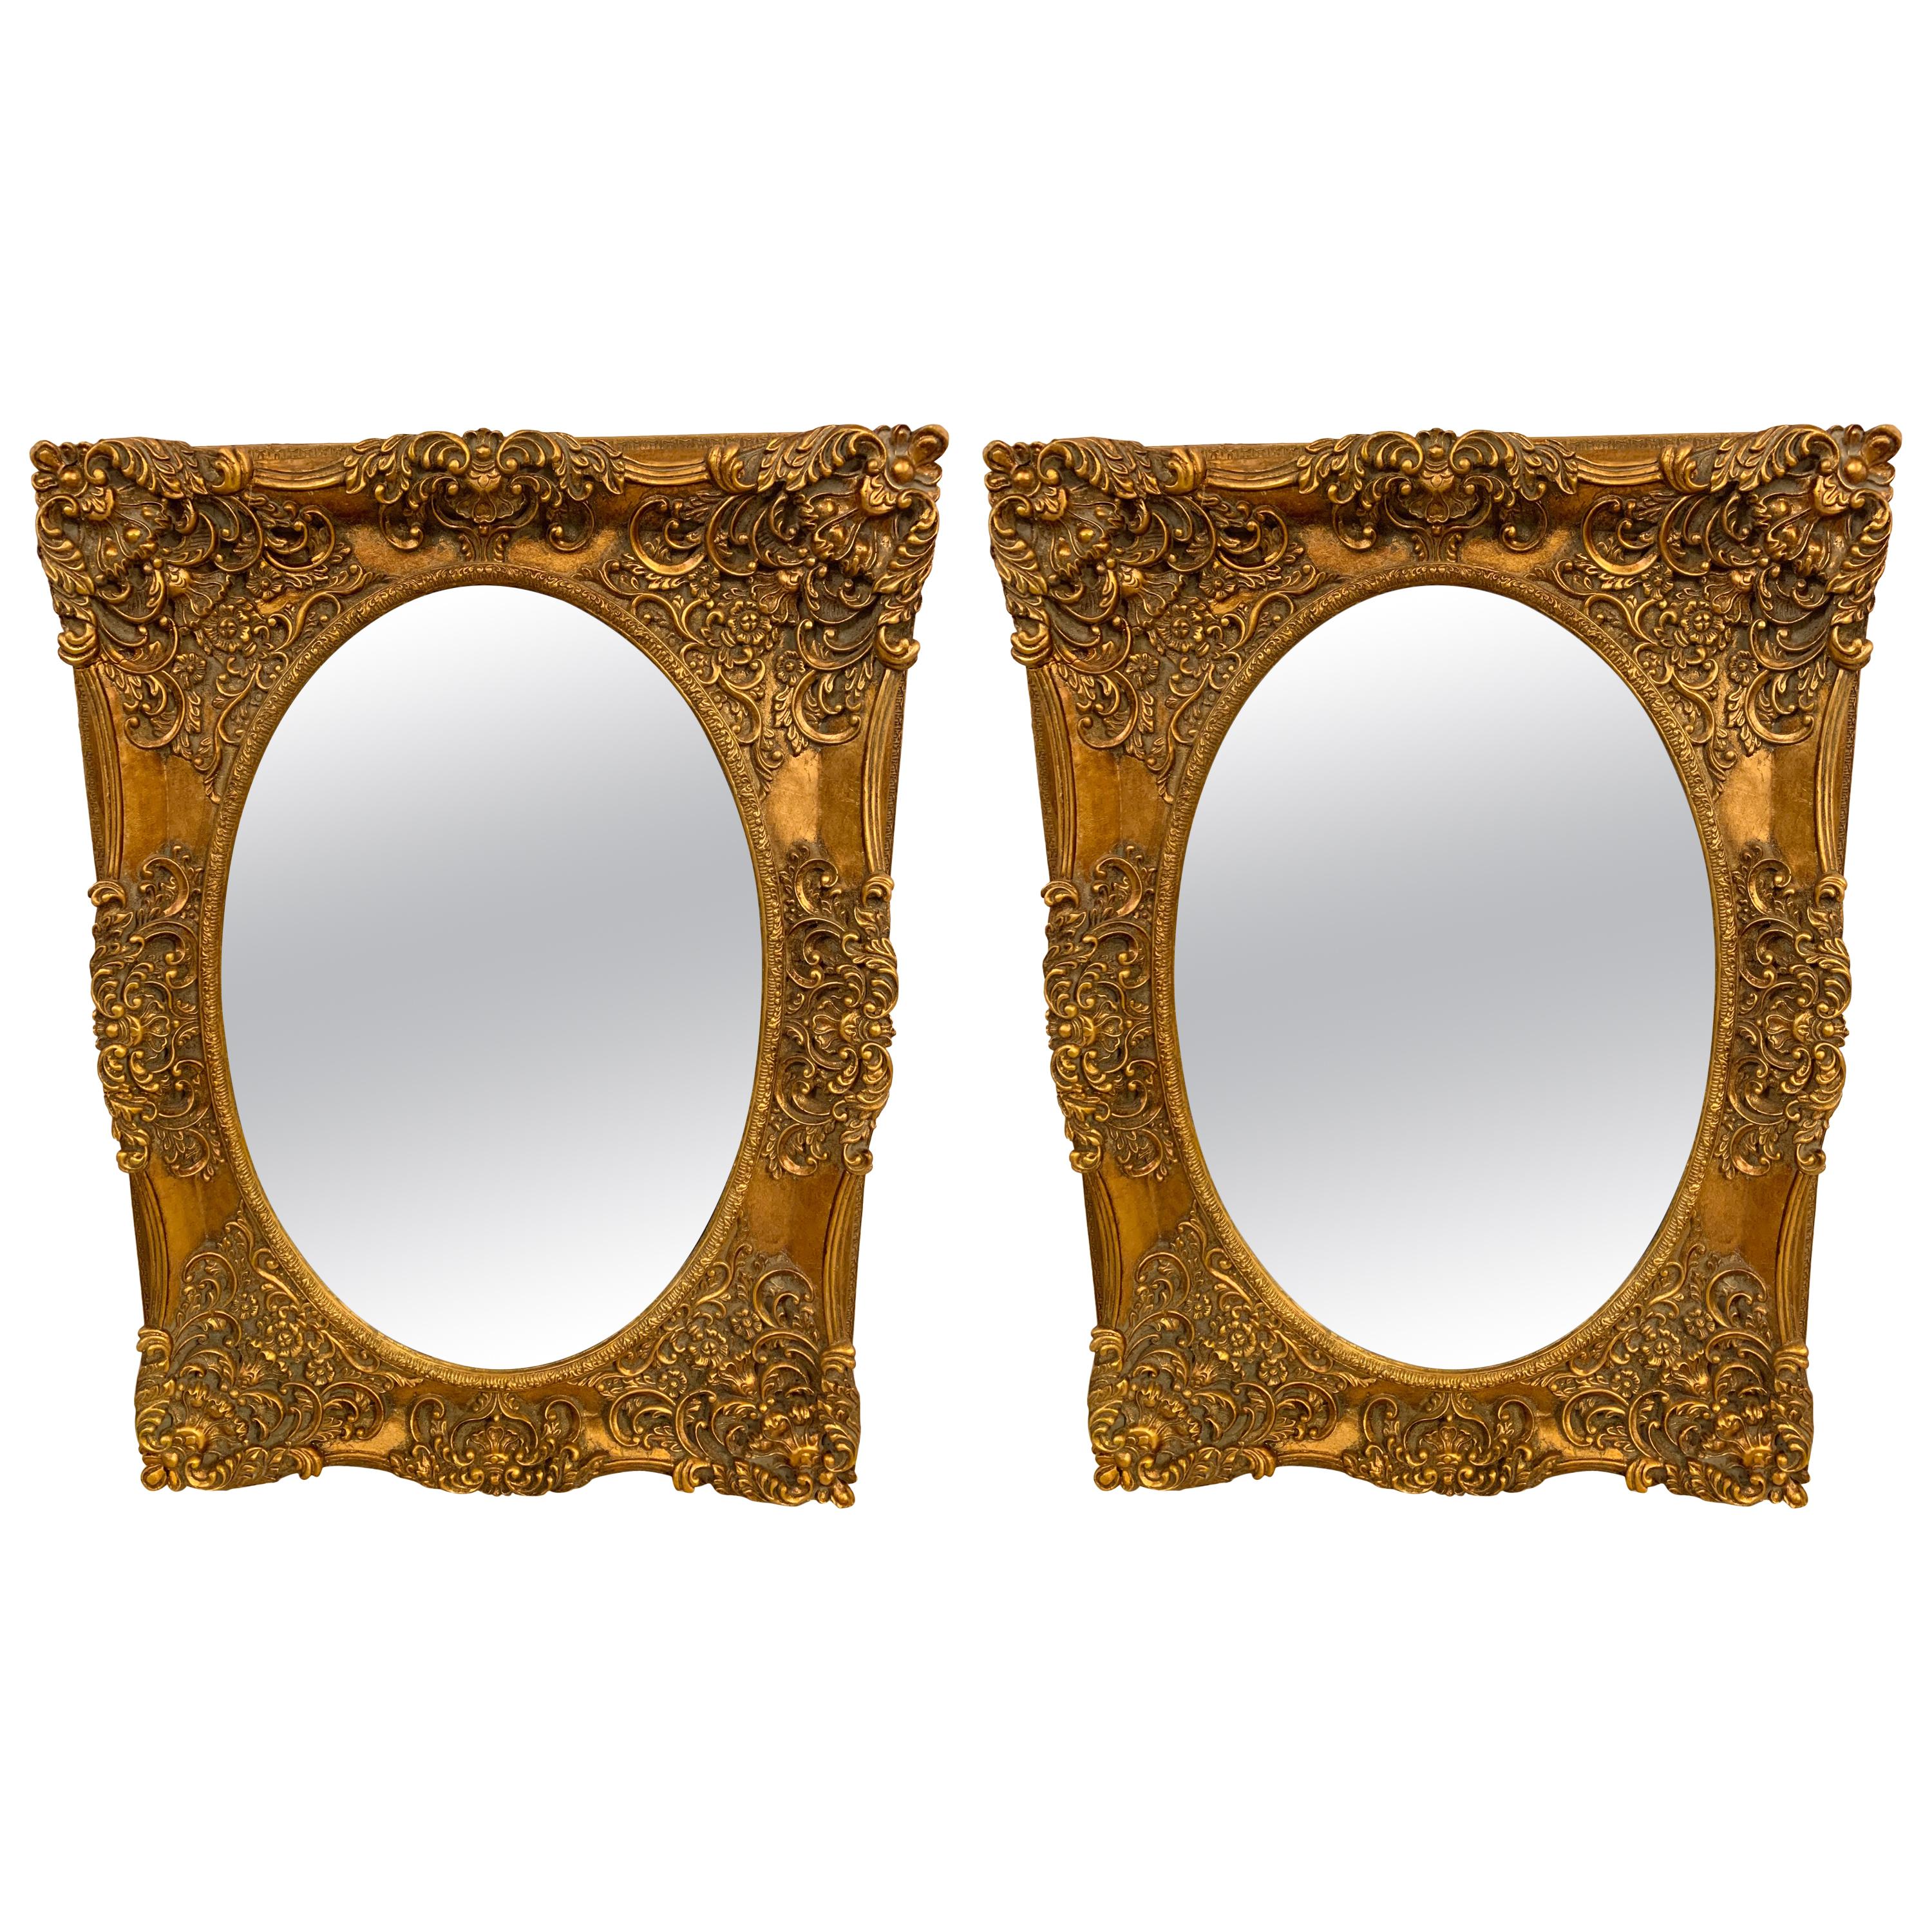 Pair of French Style Wall, Console or Pier Mirrors. Gilt Gesso and Wooden. 